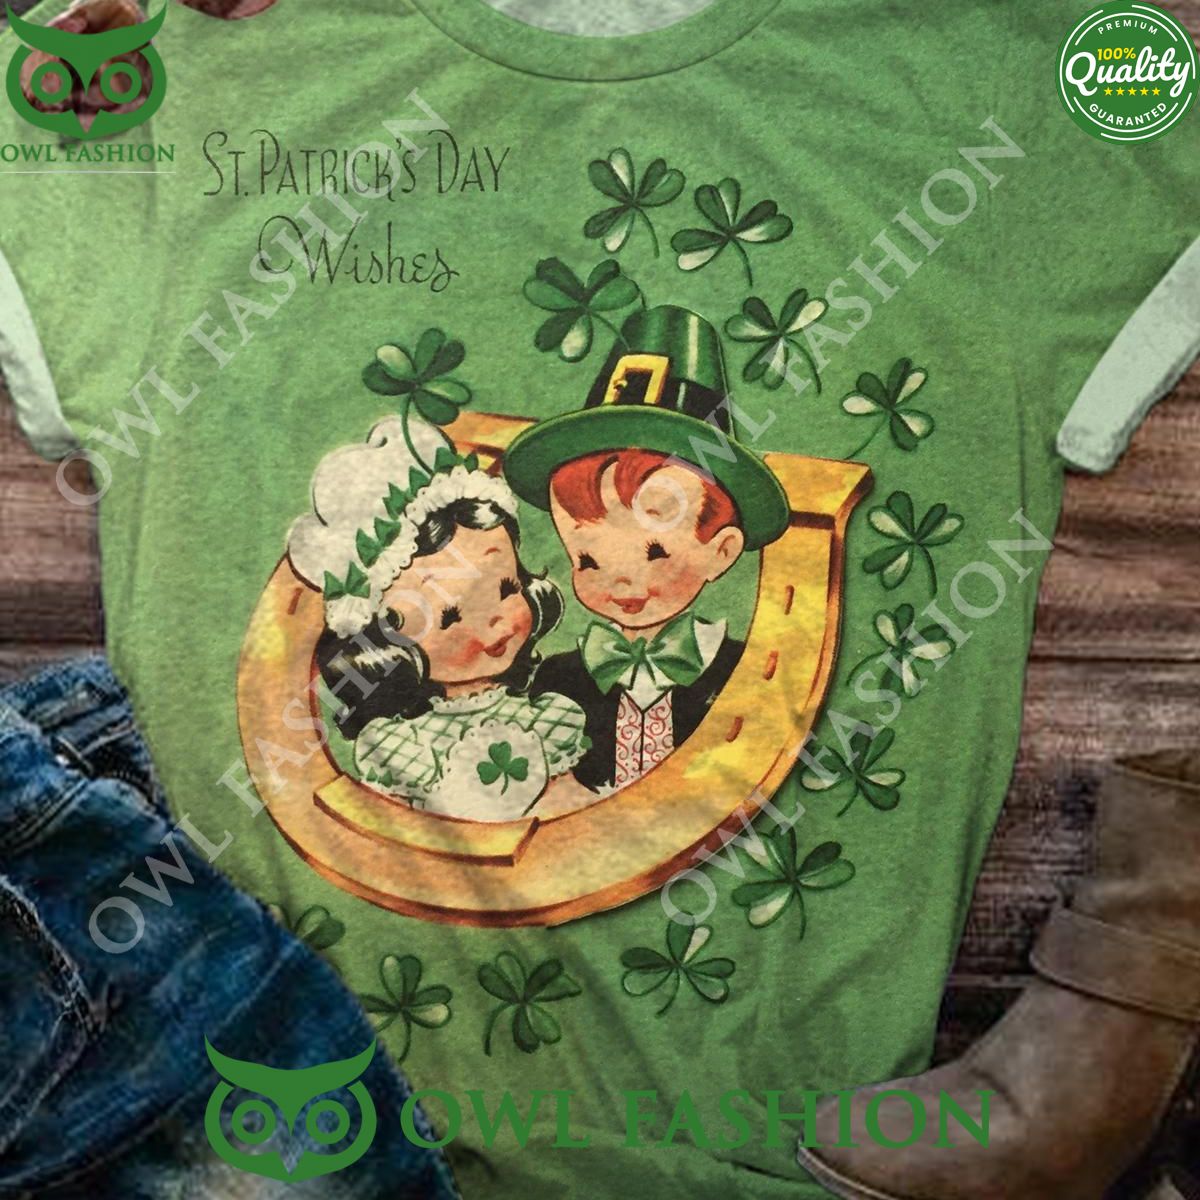 Vintage St. Patrick Wishes t shirt Oh! You make me reminded of college days